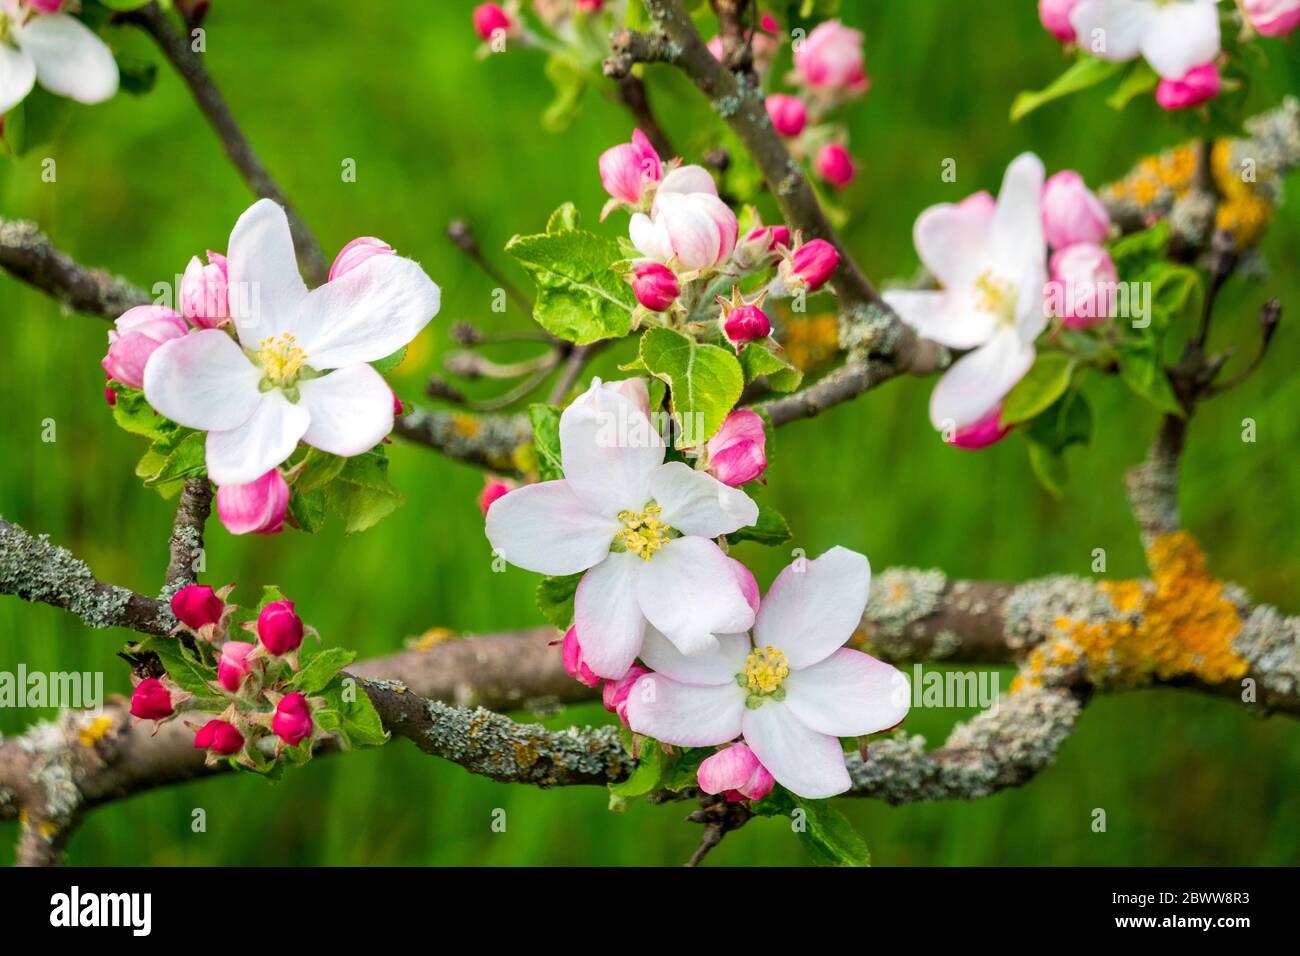 Germany, Branches of blossoming apple tree Stock Photo